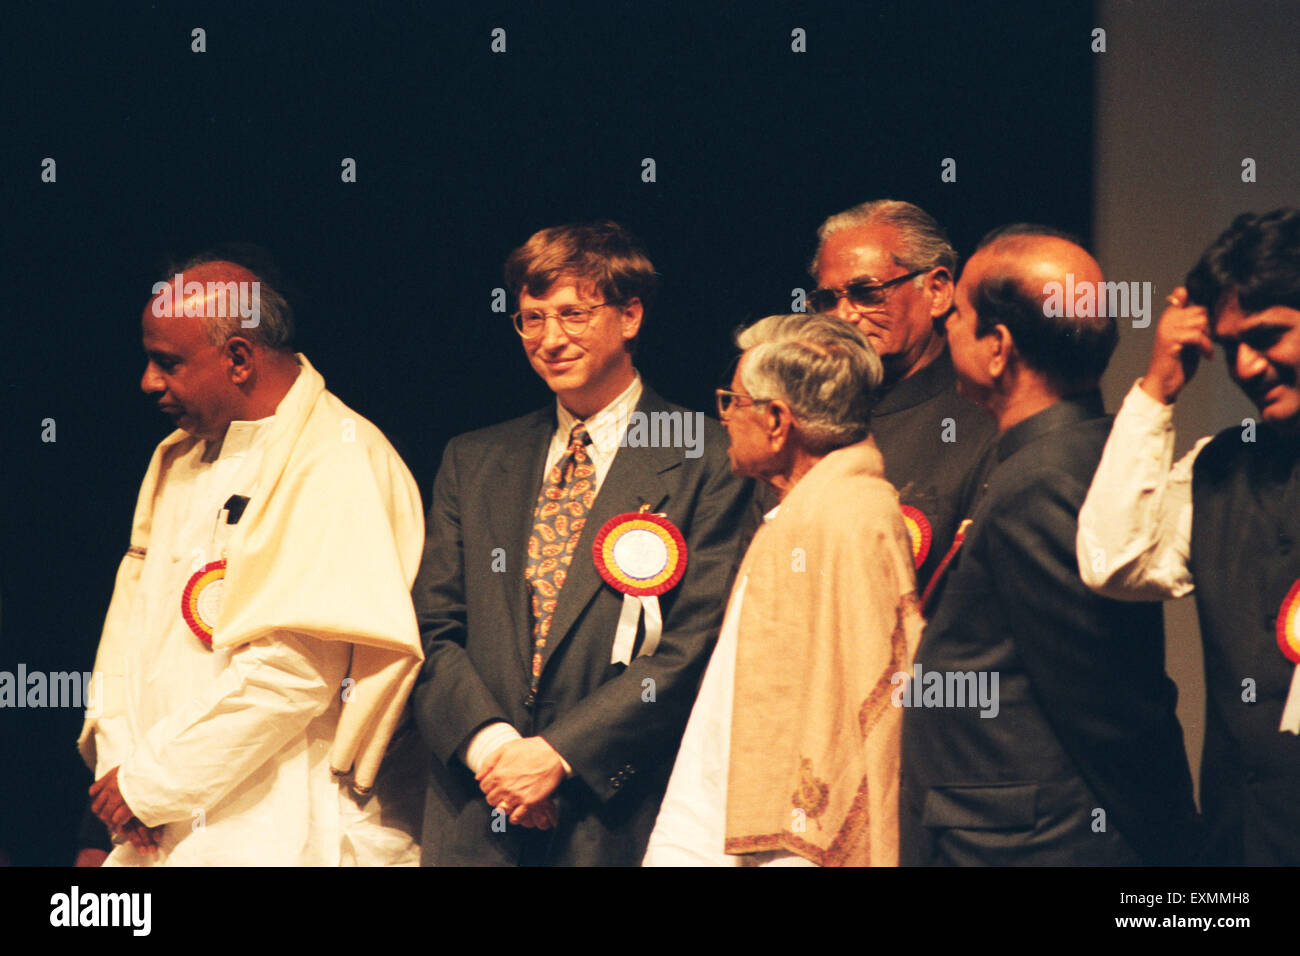 Bill Gates, American business magnate, William Henry Gates III, software developer, investor, author, philanthropist, co-founder of Microsoft Corporation, with Indian politicians, India, Asia Stock Photo